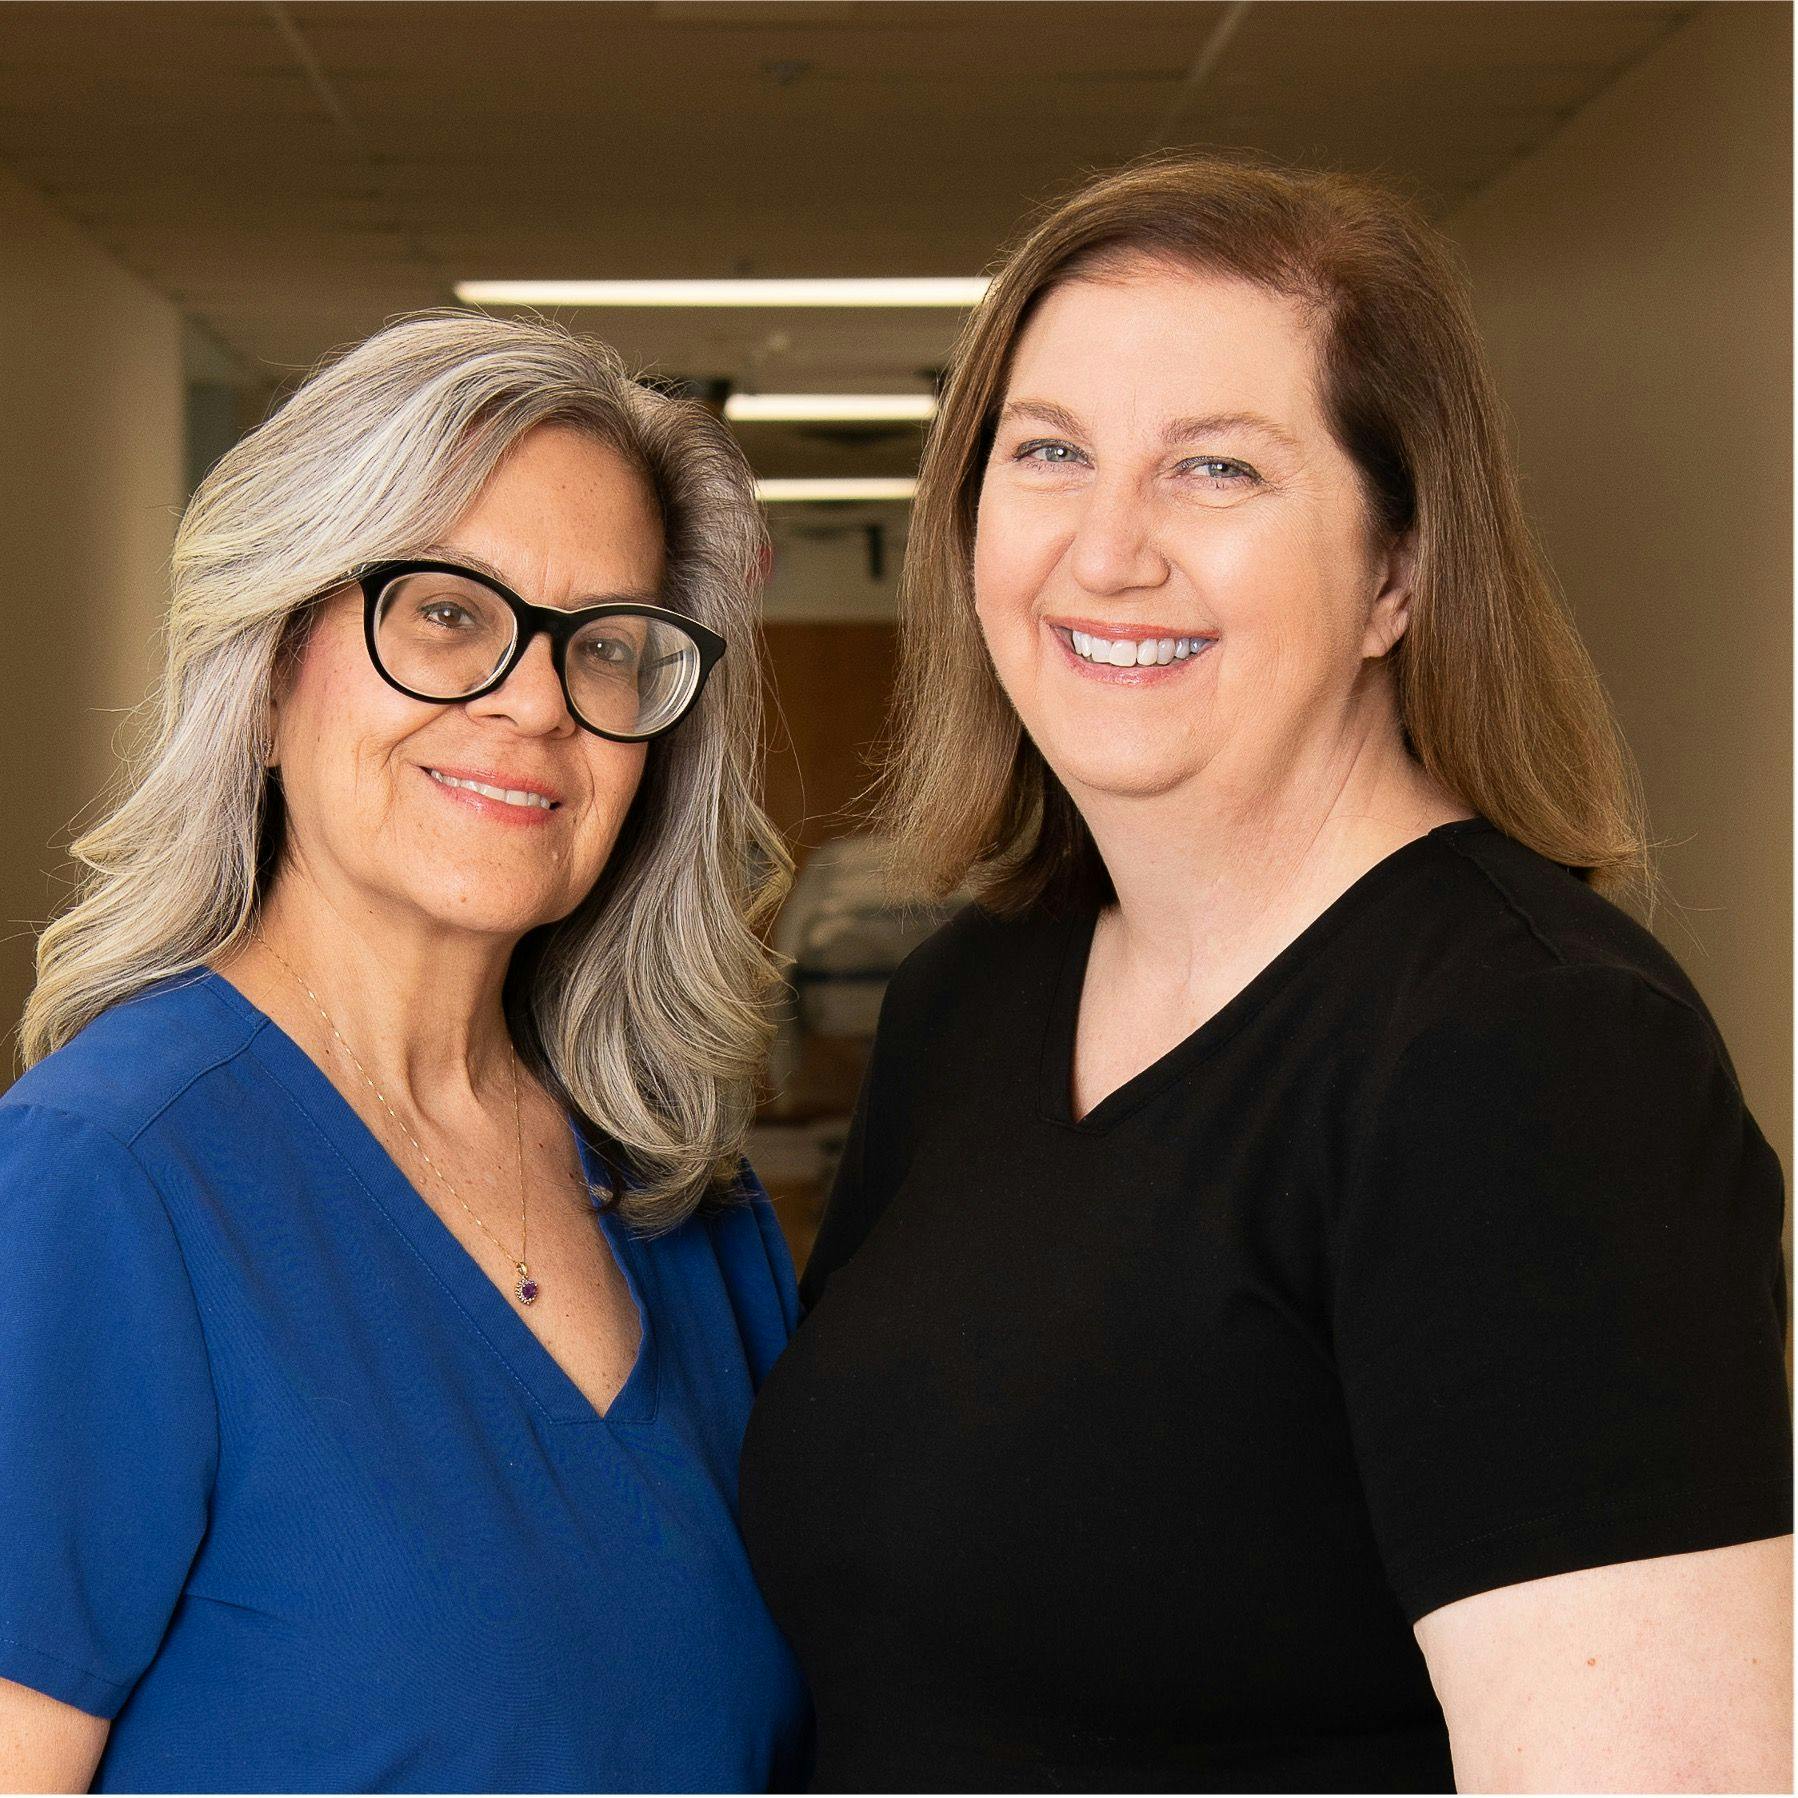 From left: Cynthia Dasaad, M.S.N., RN, OCN, a blonde nurse with blue scrubs and thick black glasses and Deborah Lorick, M.S.N., M.H.A., RN, OCN, a nurse with black scrubs. Both are smiling at the camera.   Photo by Nadia Kelm 